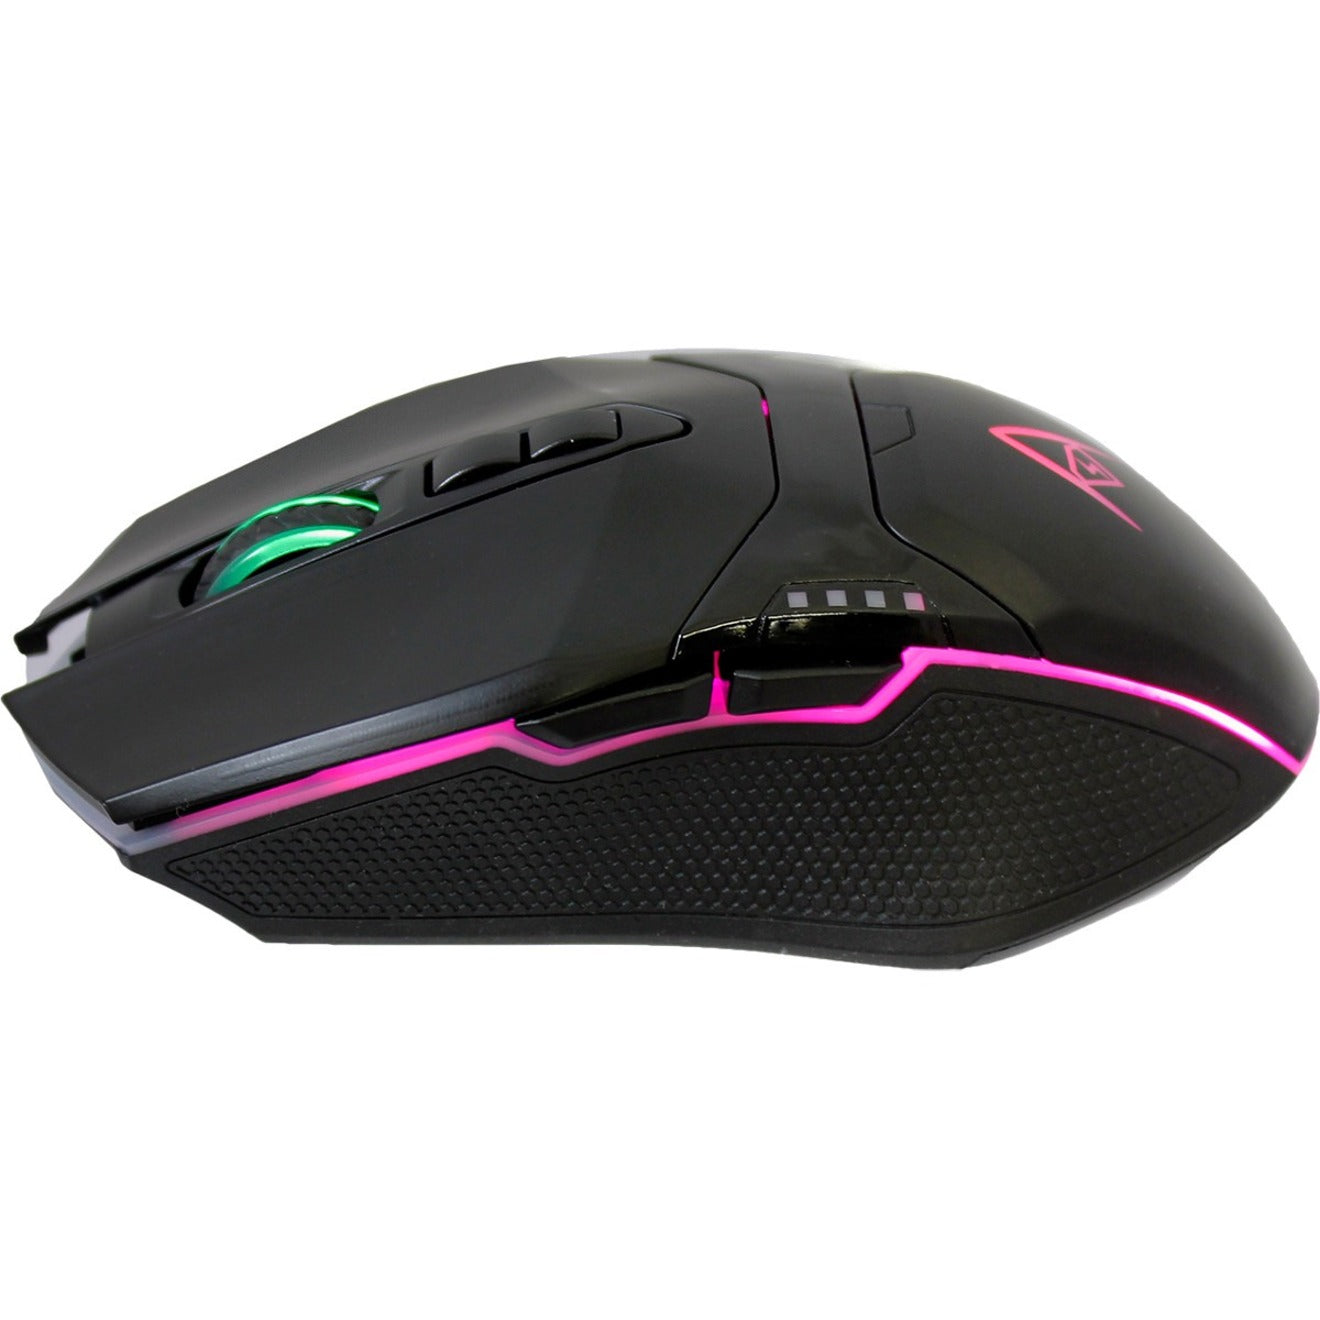 Adesso IMOUSE X5 RGB Illuminated Gaming Mouse, 6400 DPI, Ergonomic Fit, 7 Buttons